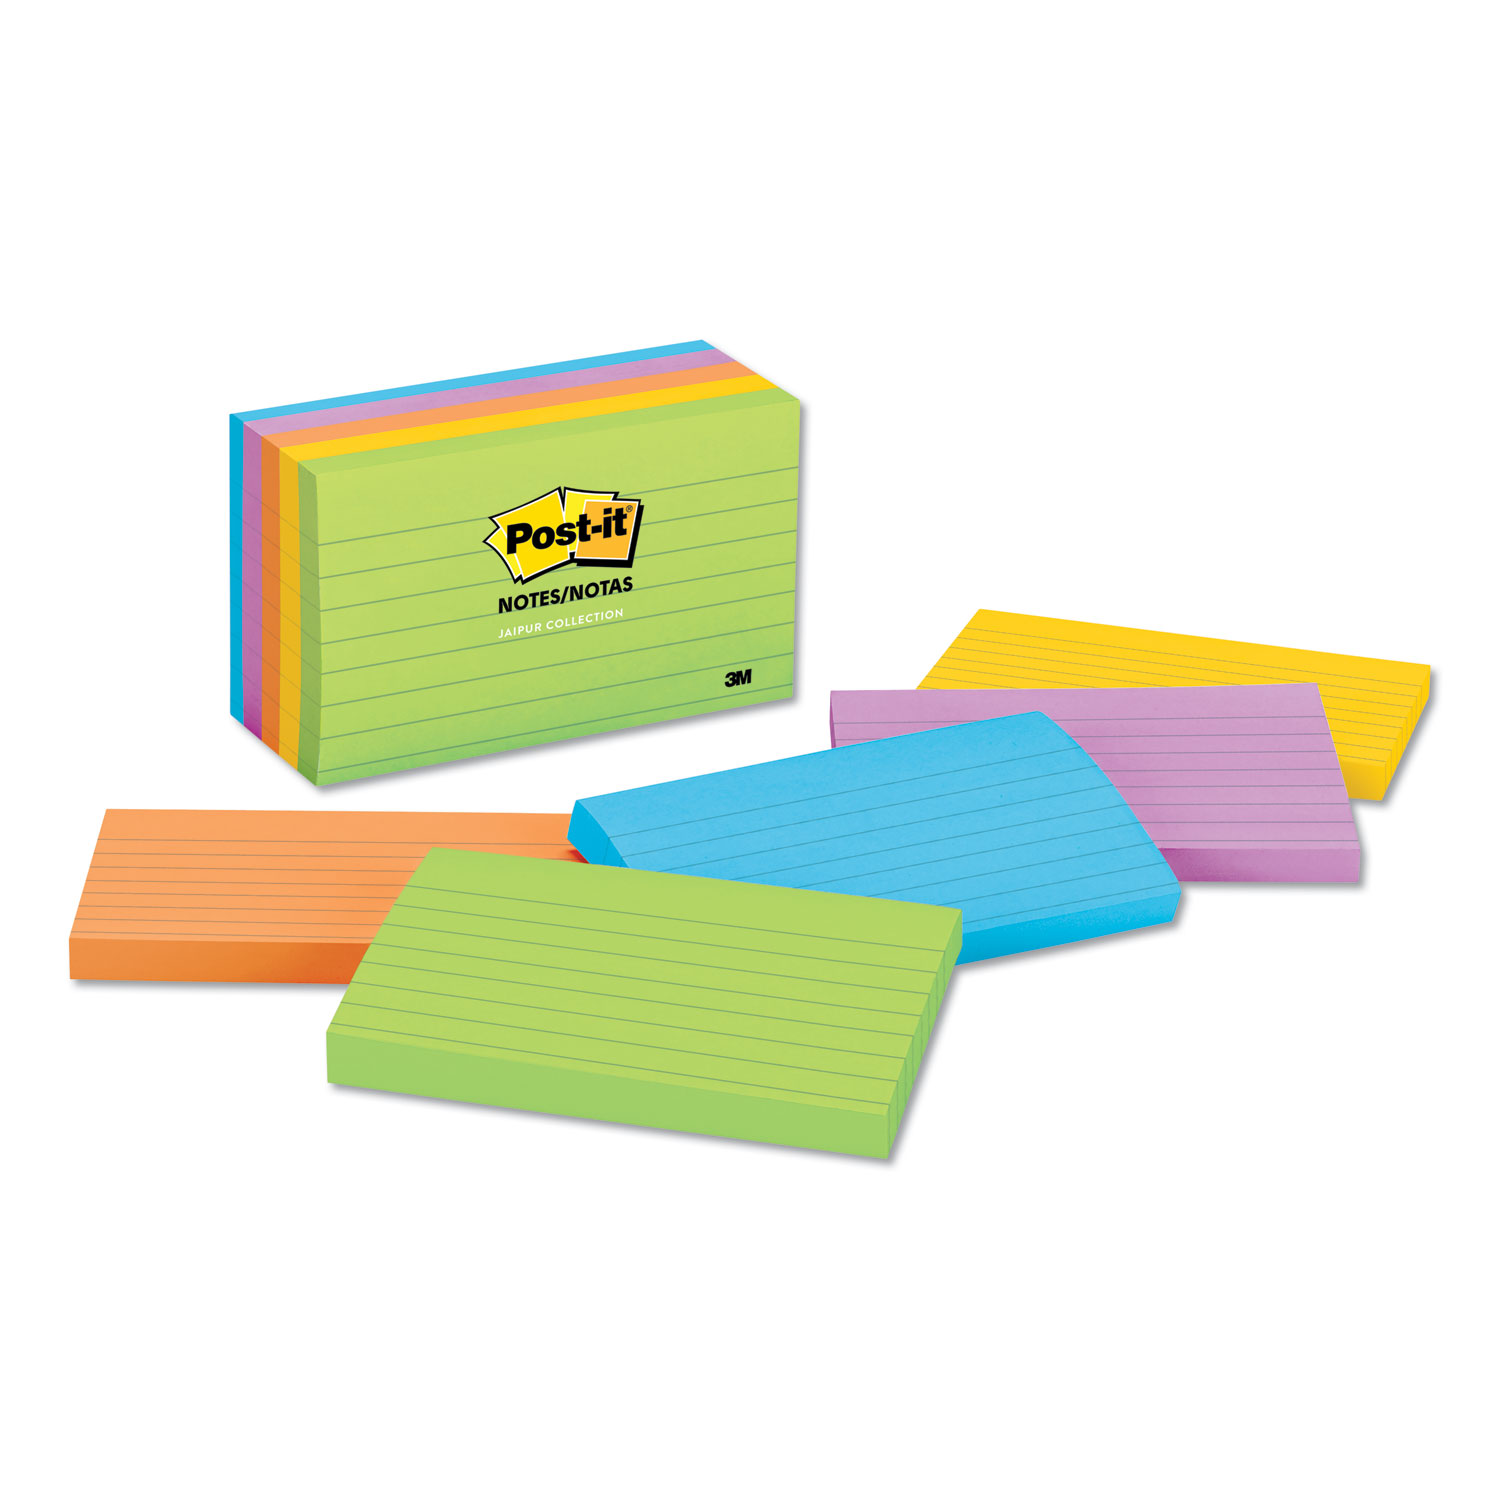  Post-it Notes 635-5AU Original Pads in Jaipur Colors, 3 x 5, Lined, 100-Sheet, 5/Pack (MMM6355AU) 